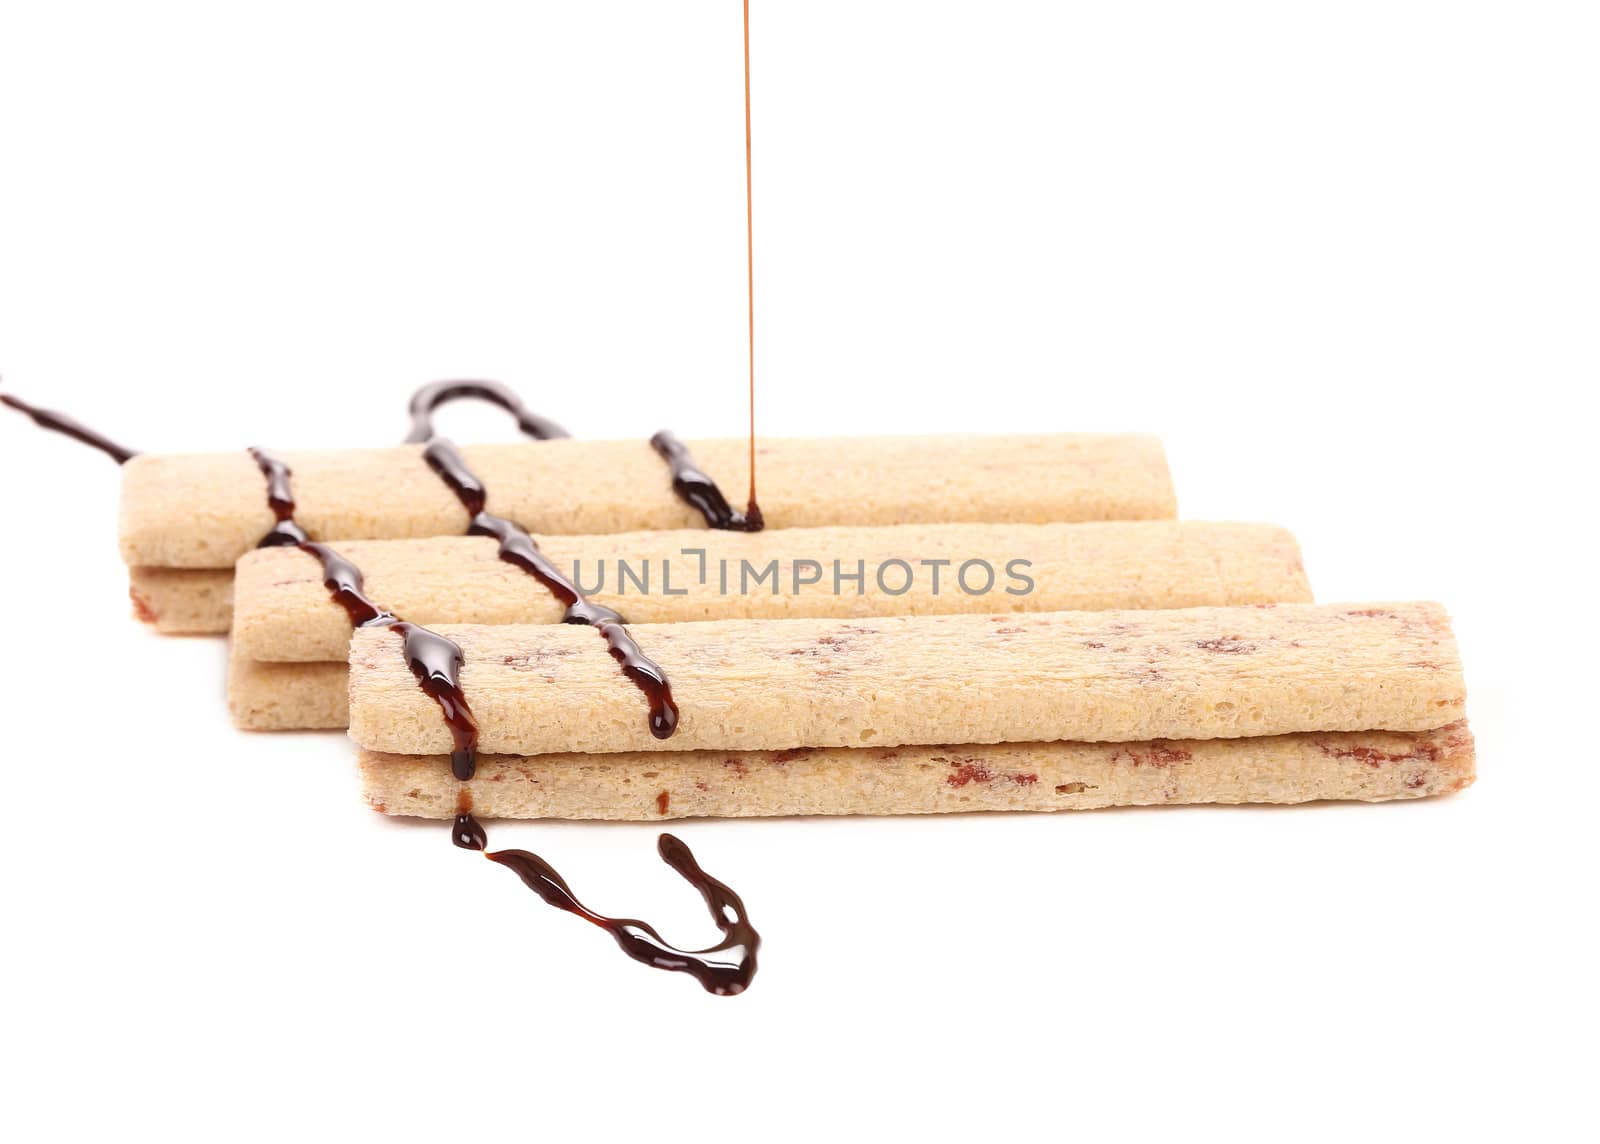 Coated cookie of chocolate. Isolated on a white background.